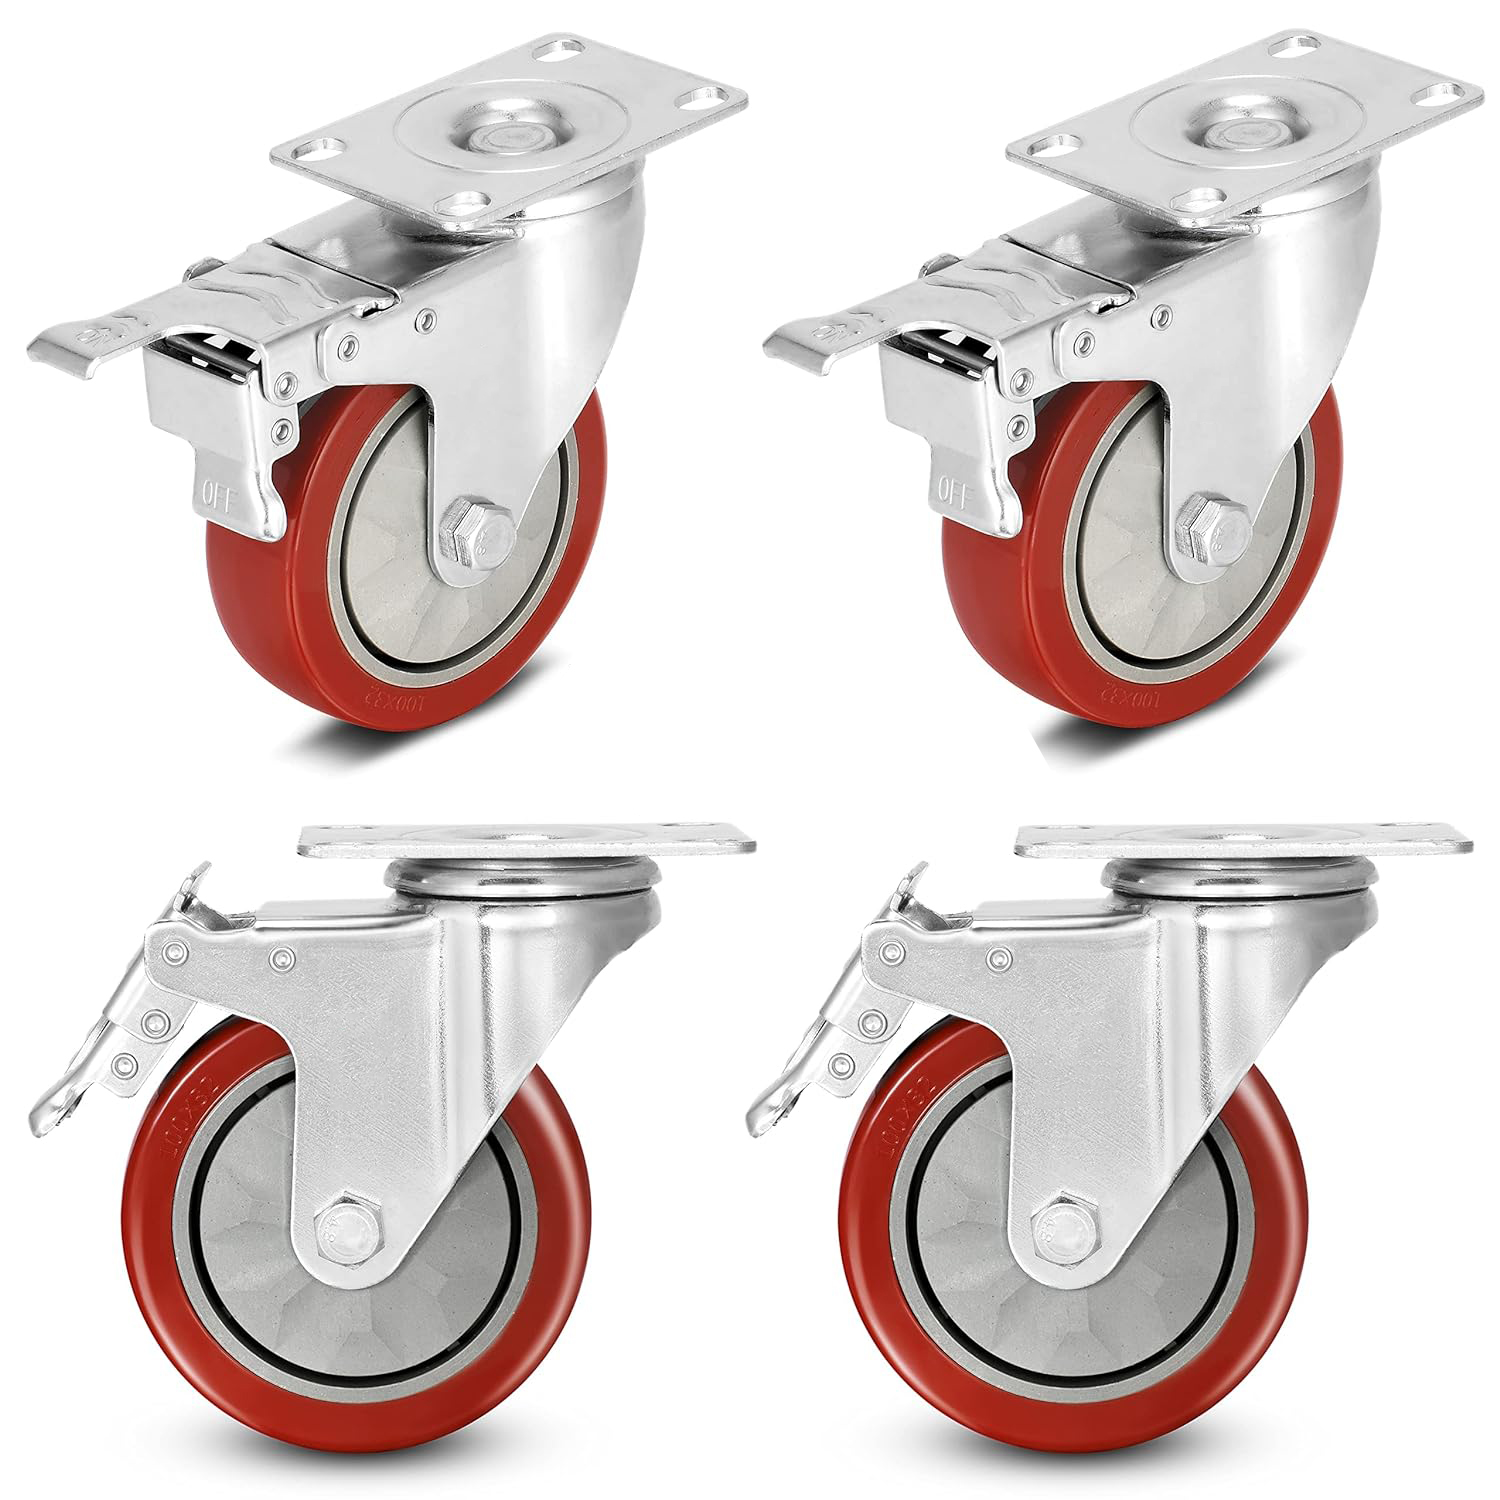 4 Inch Heavy Duty Lockable Bearing Swivel Casters for Furniture And Workbench